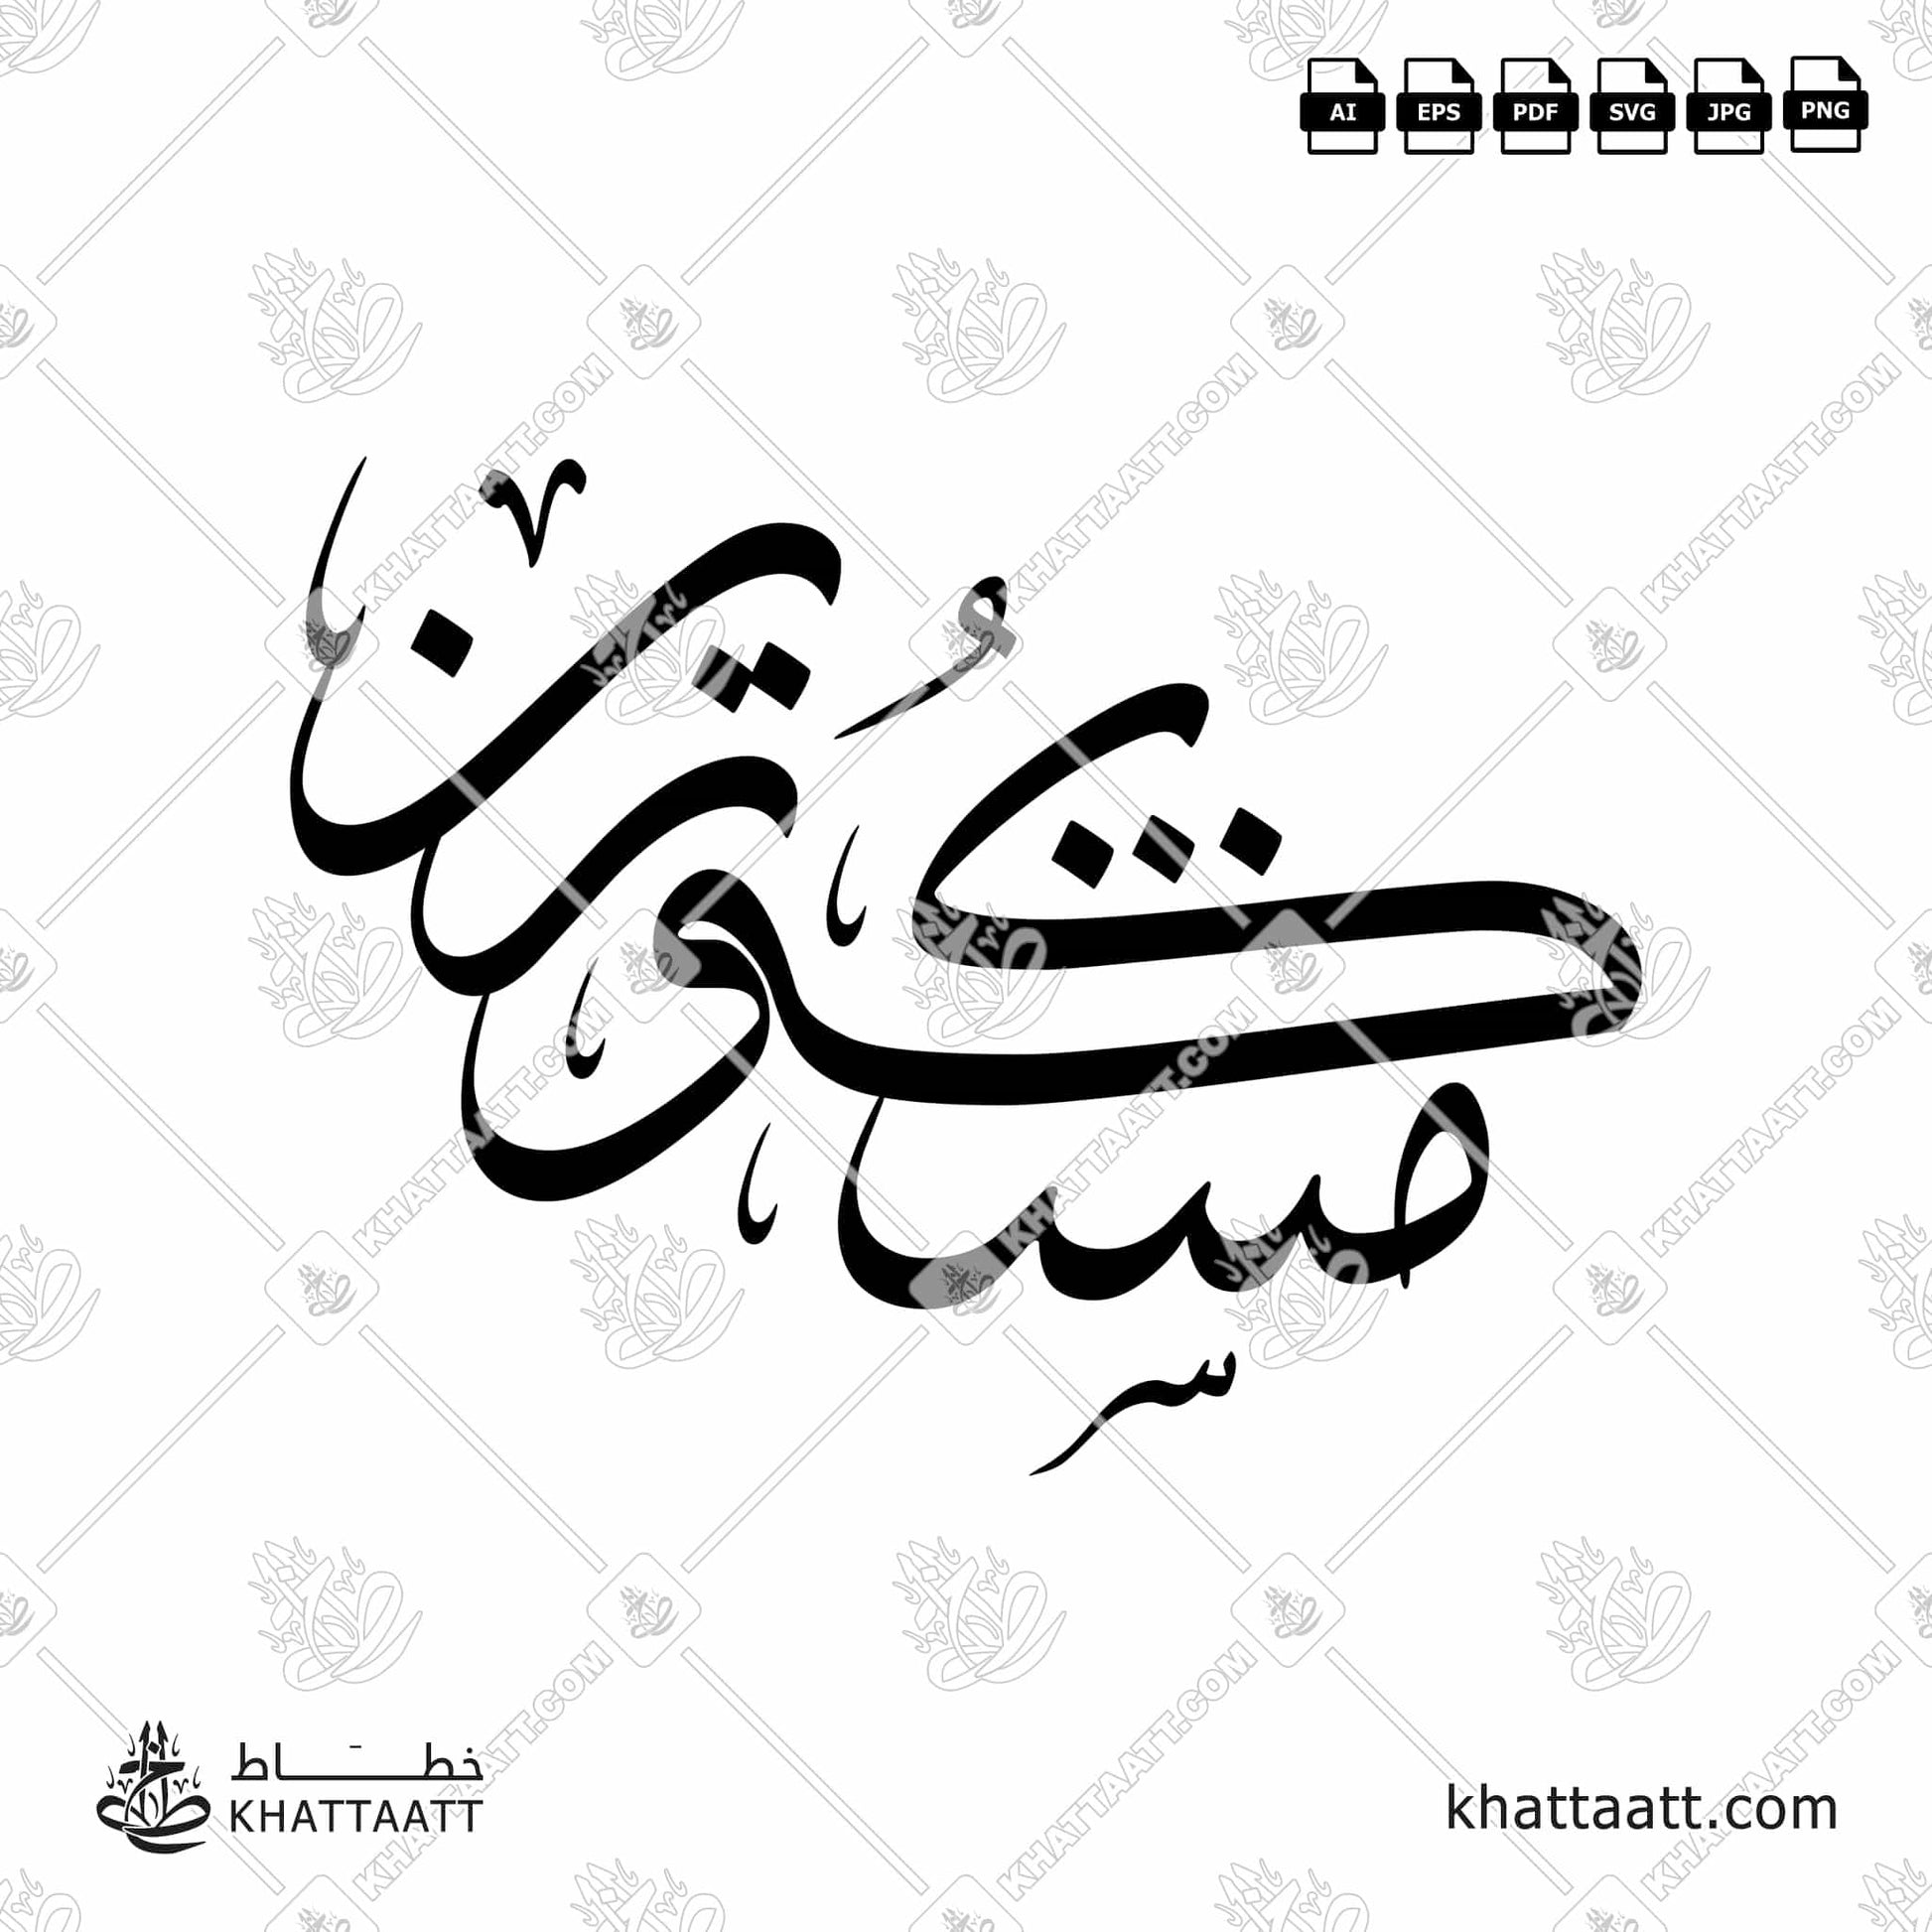 Arabic Calligraphy of مشكورين mashkurin, it used to give thanks in some Arab countries.